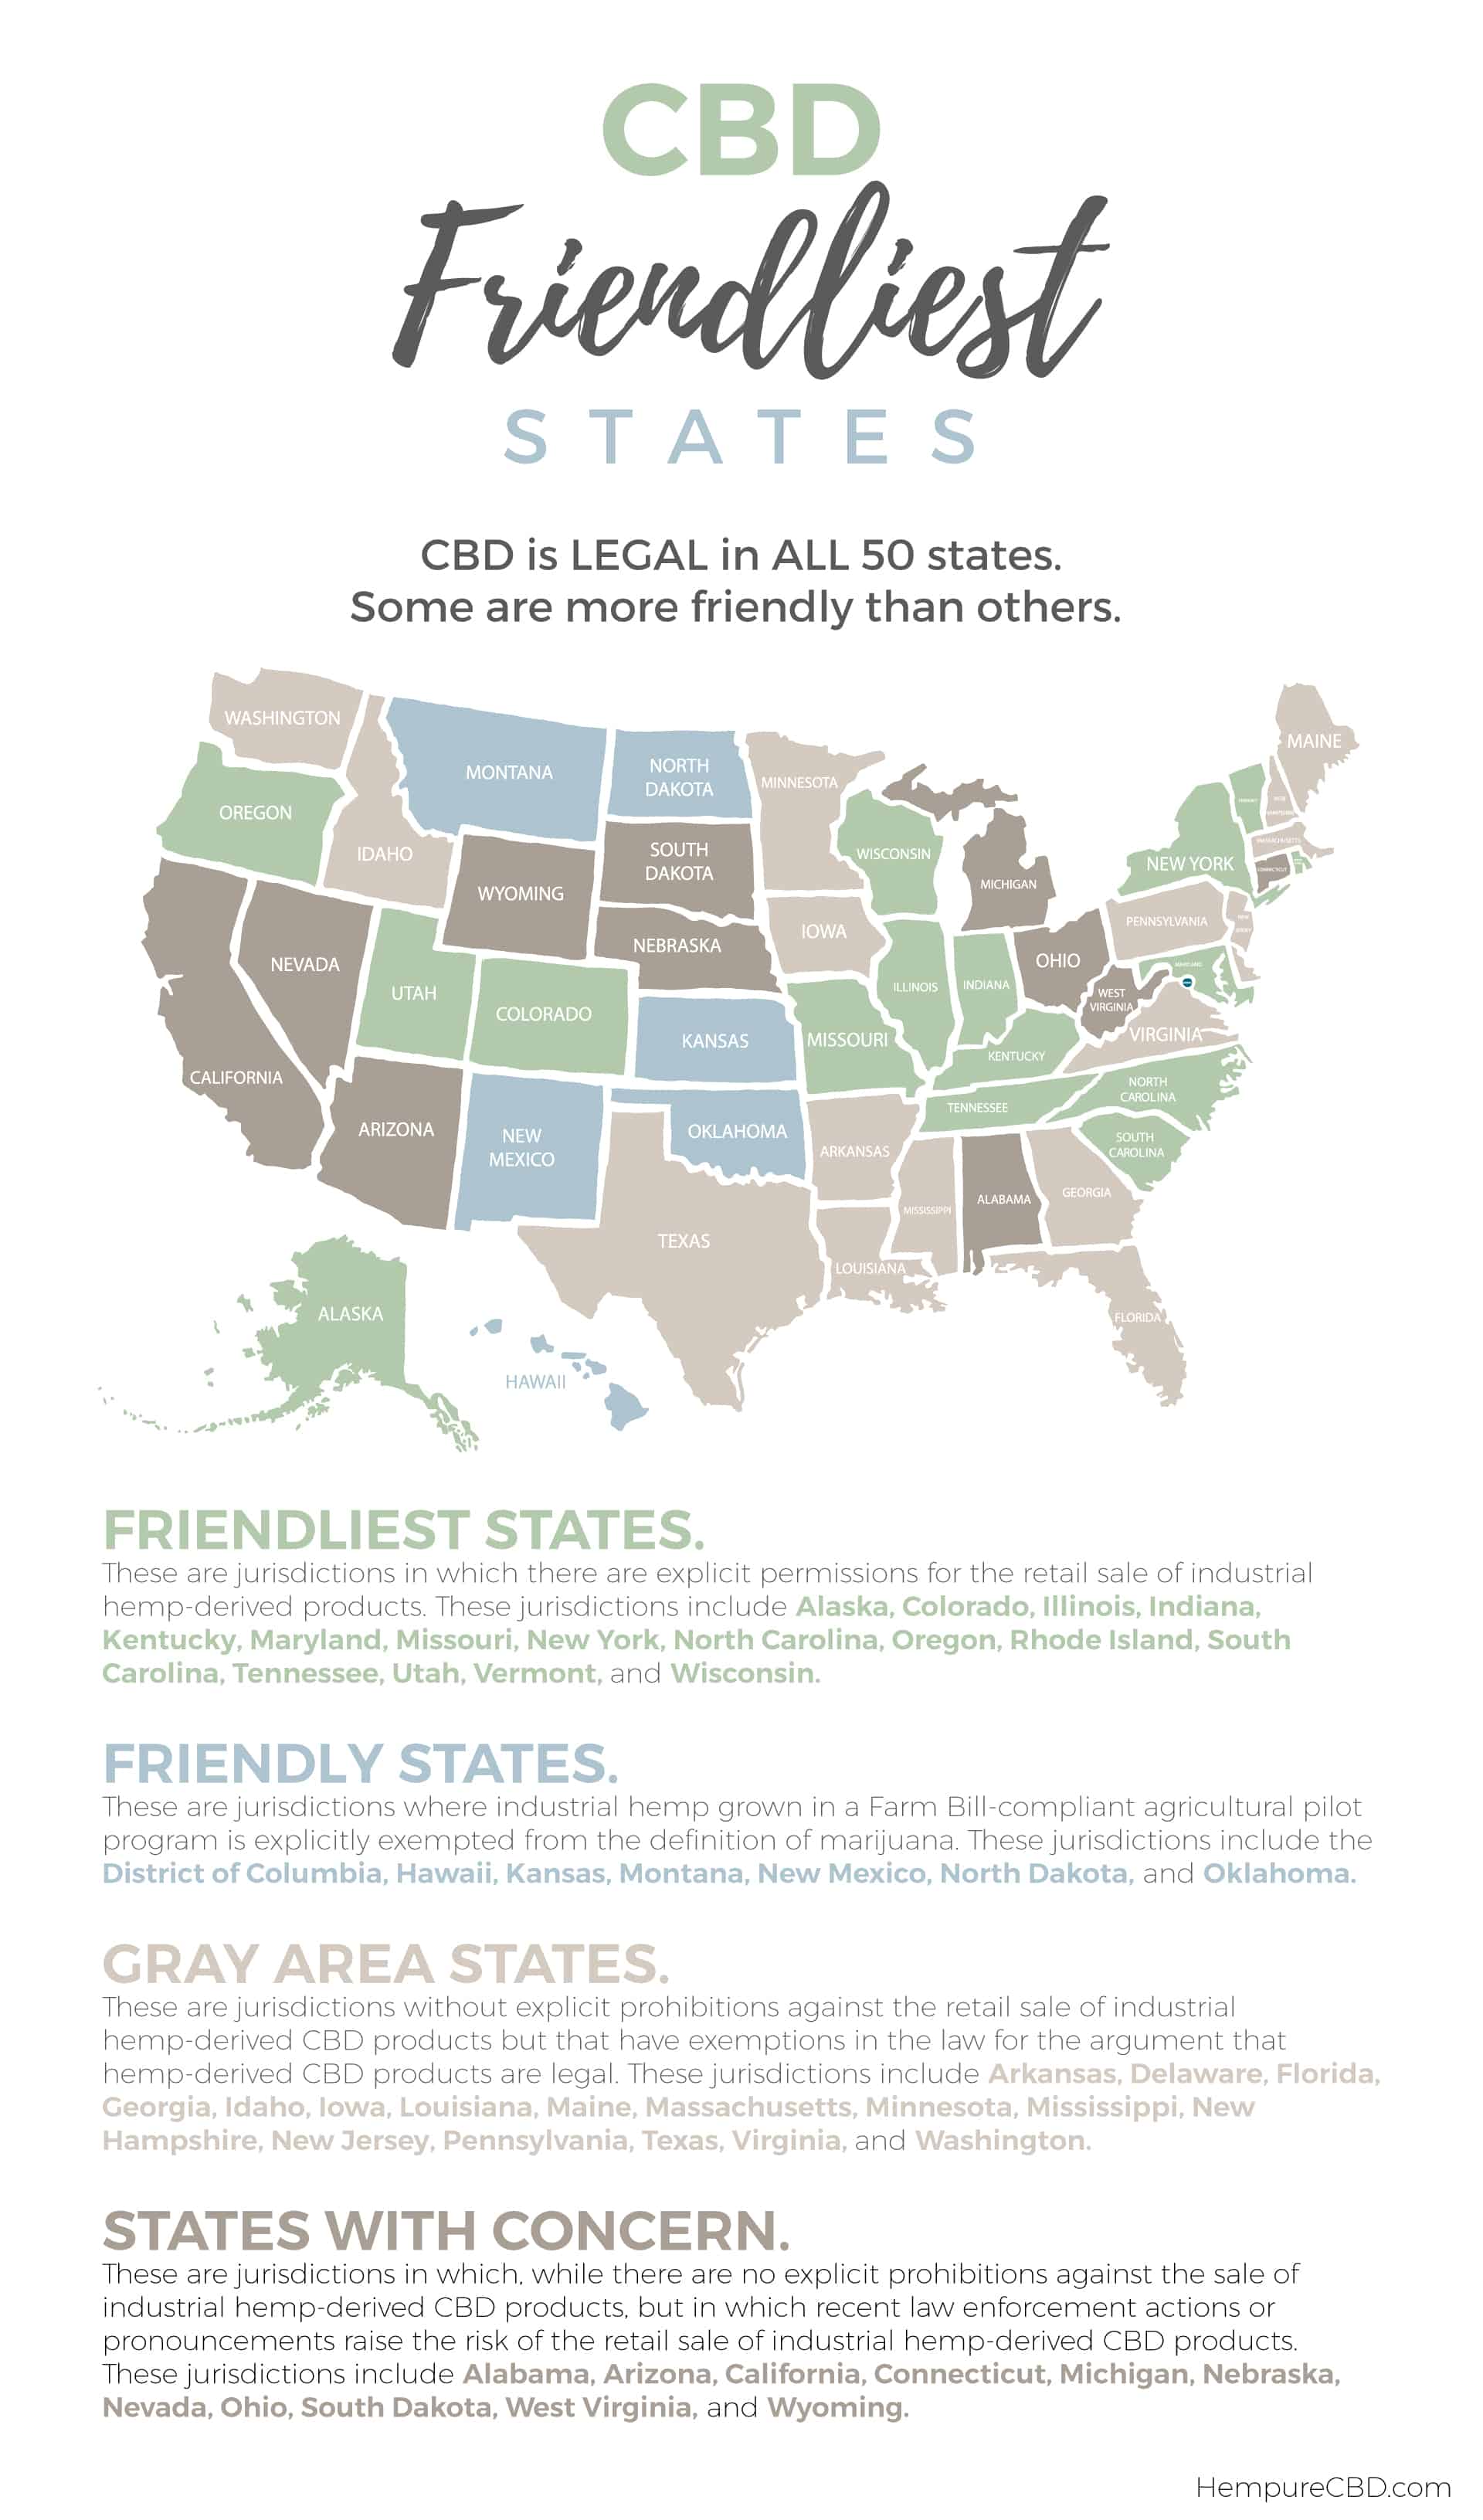 Legality of CBD in all 50 states